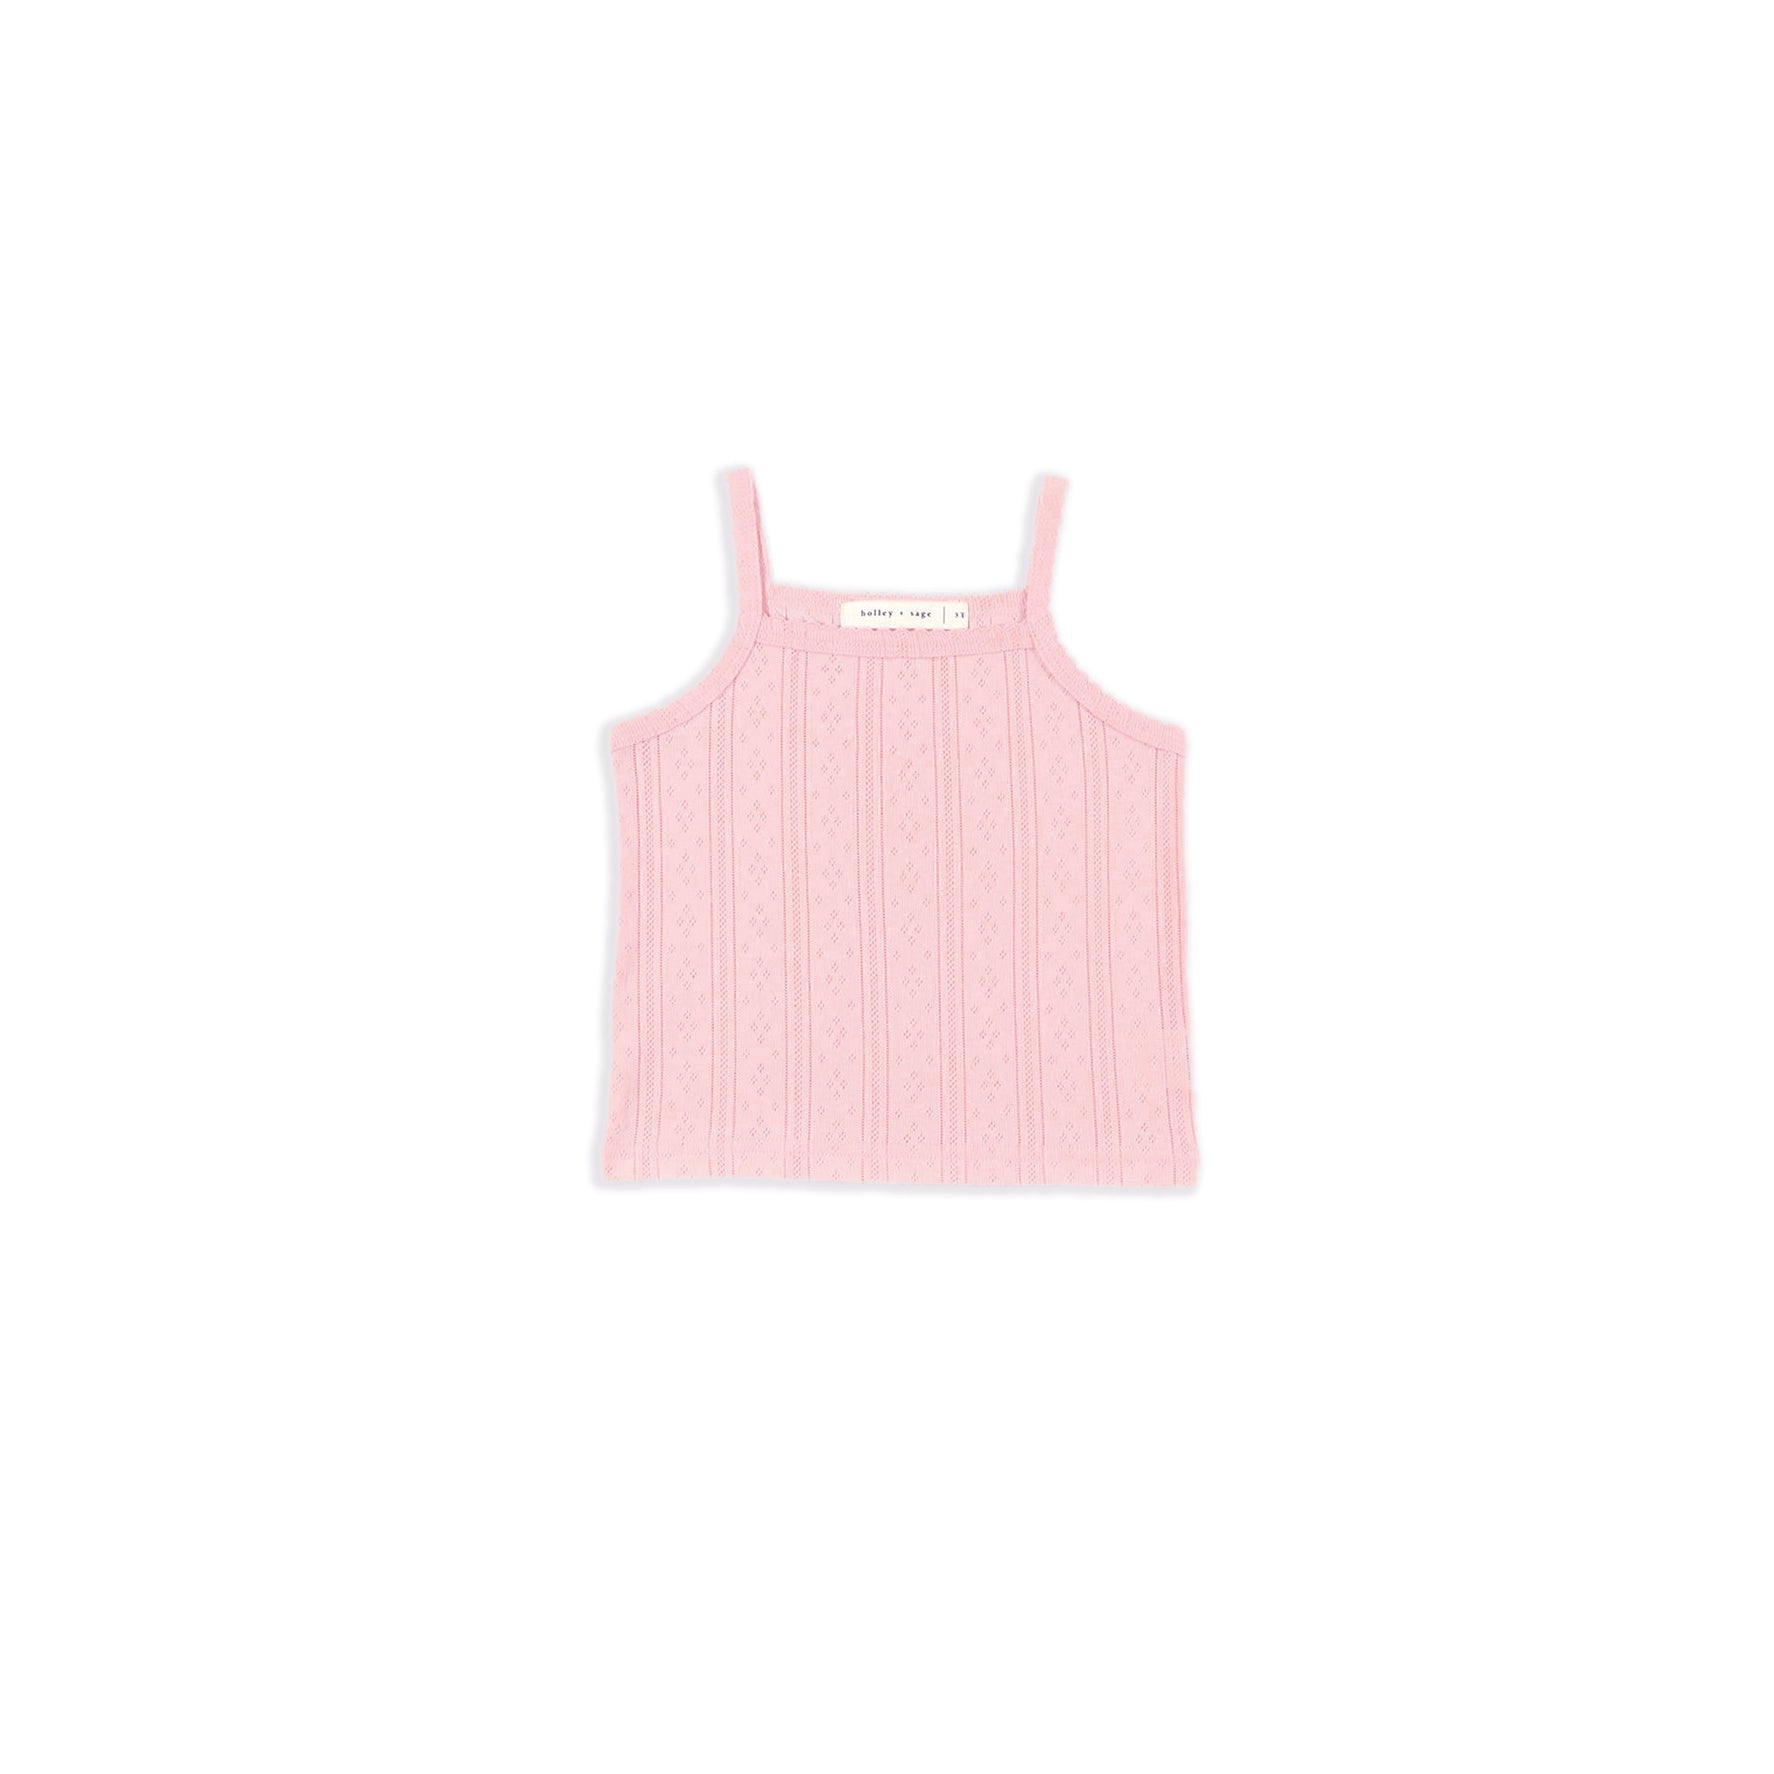 Pointelle Camisole in Rose Petal